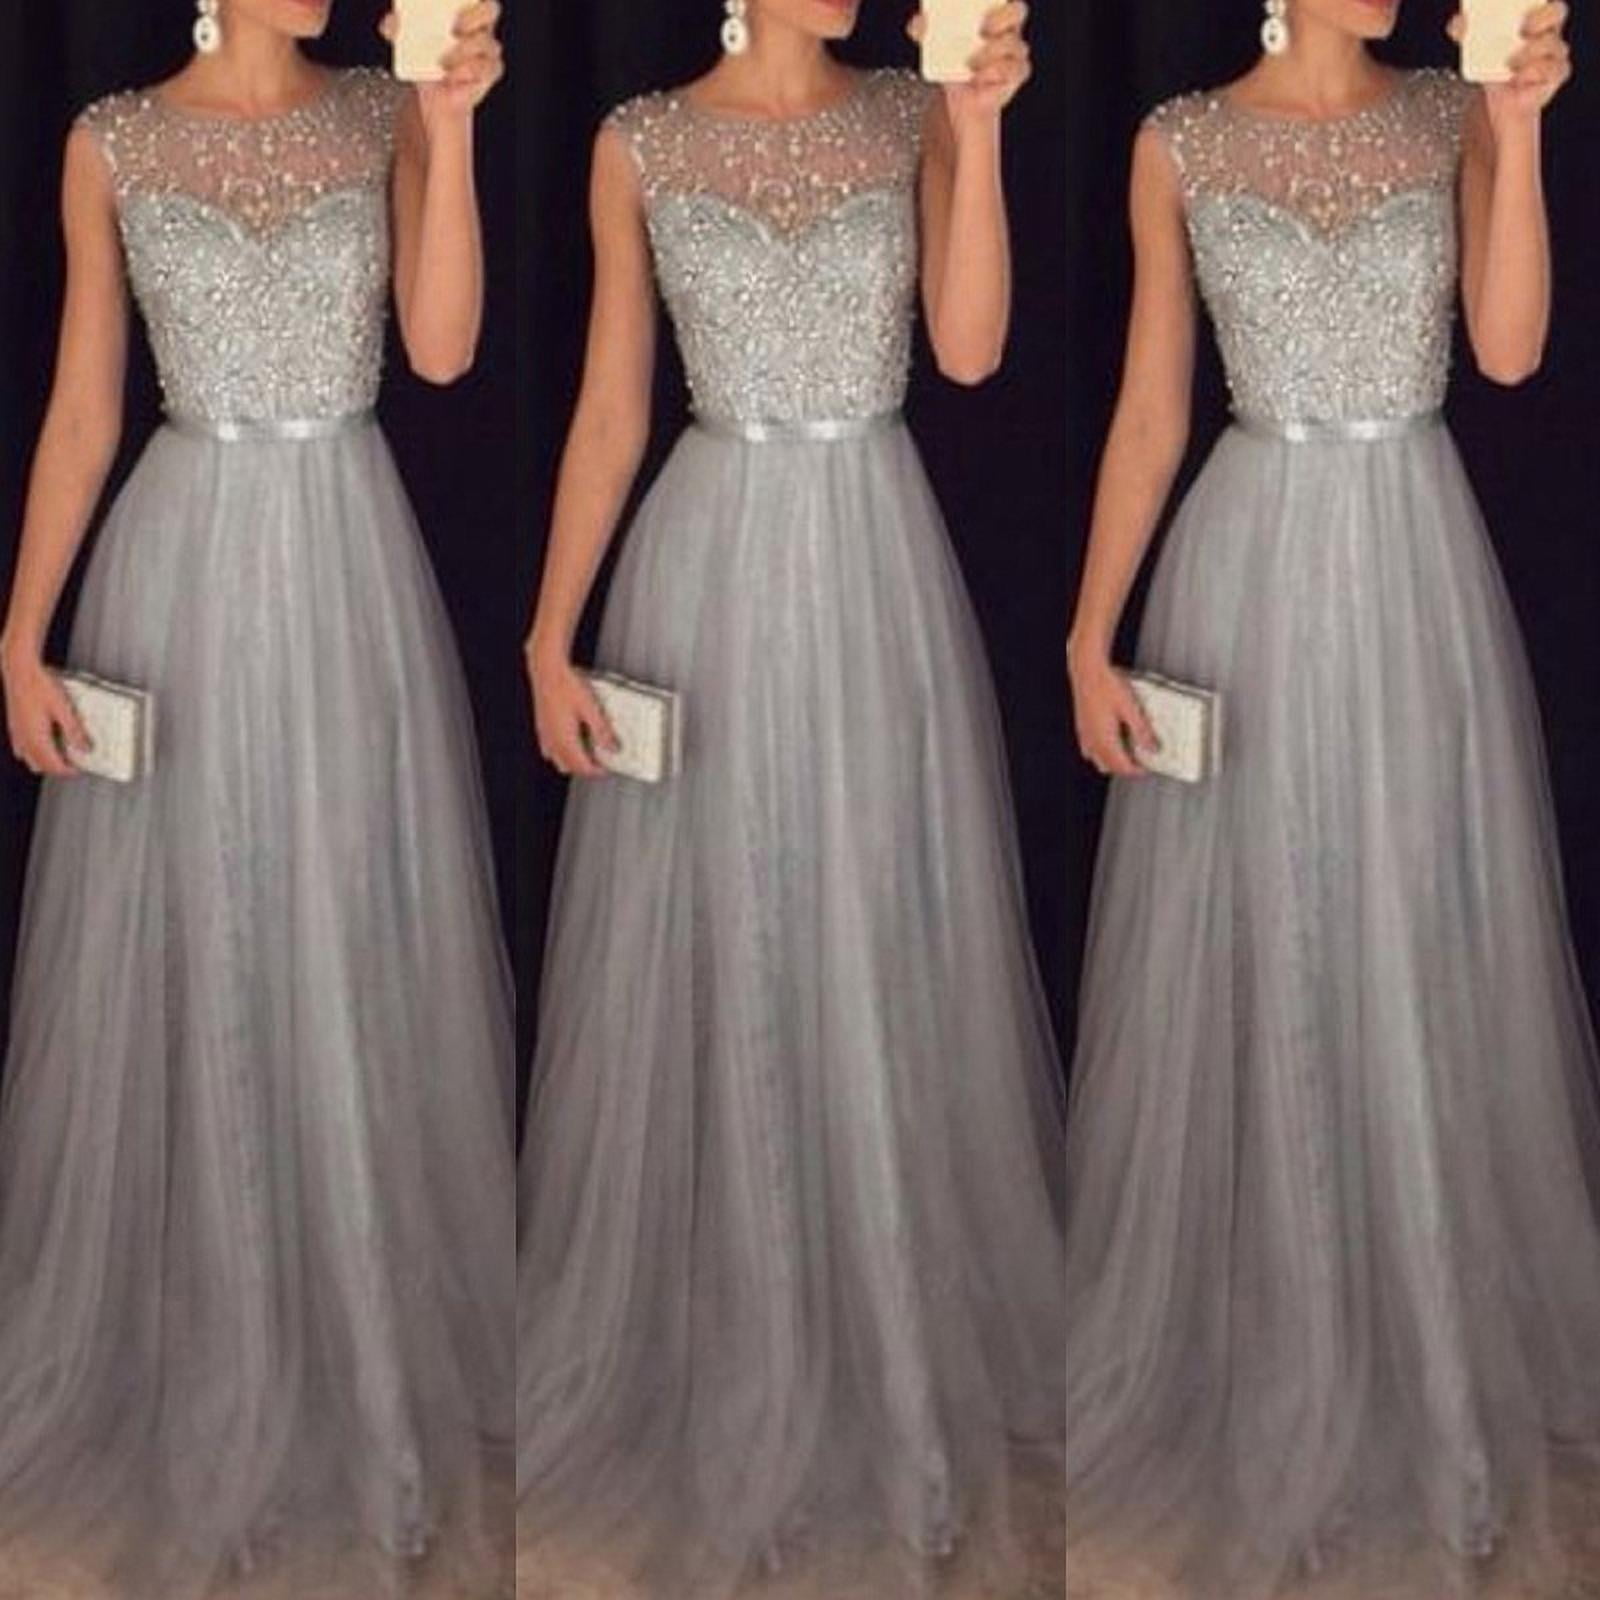 Sunisery Womens Formal Bridesmaid Dress Patchwork Lace V Neck Evening Party  Ball Gown Prom Cocktail Dresses 